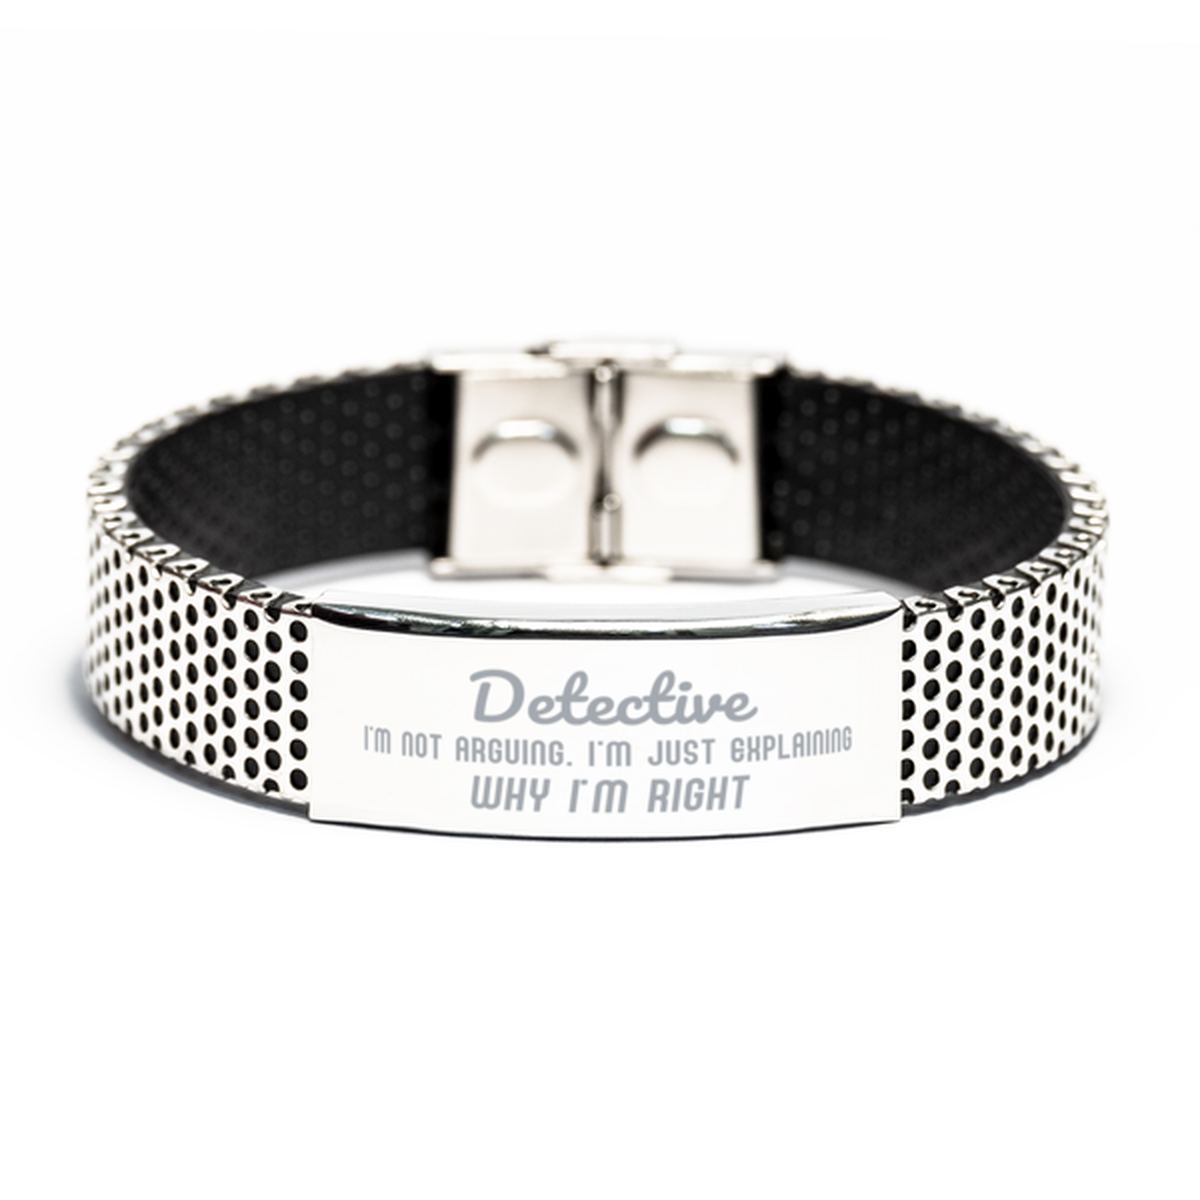 Detective I'm not Arguing. I'm Just Explaining Why I'm RIGHT Stainless Steel Bracelet, Funny Saying Quote Detective Gifts For Detective Graduation Birthday Christmas Gifts for Men Women Coworker